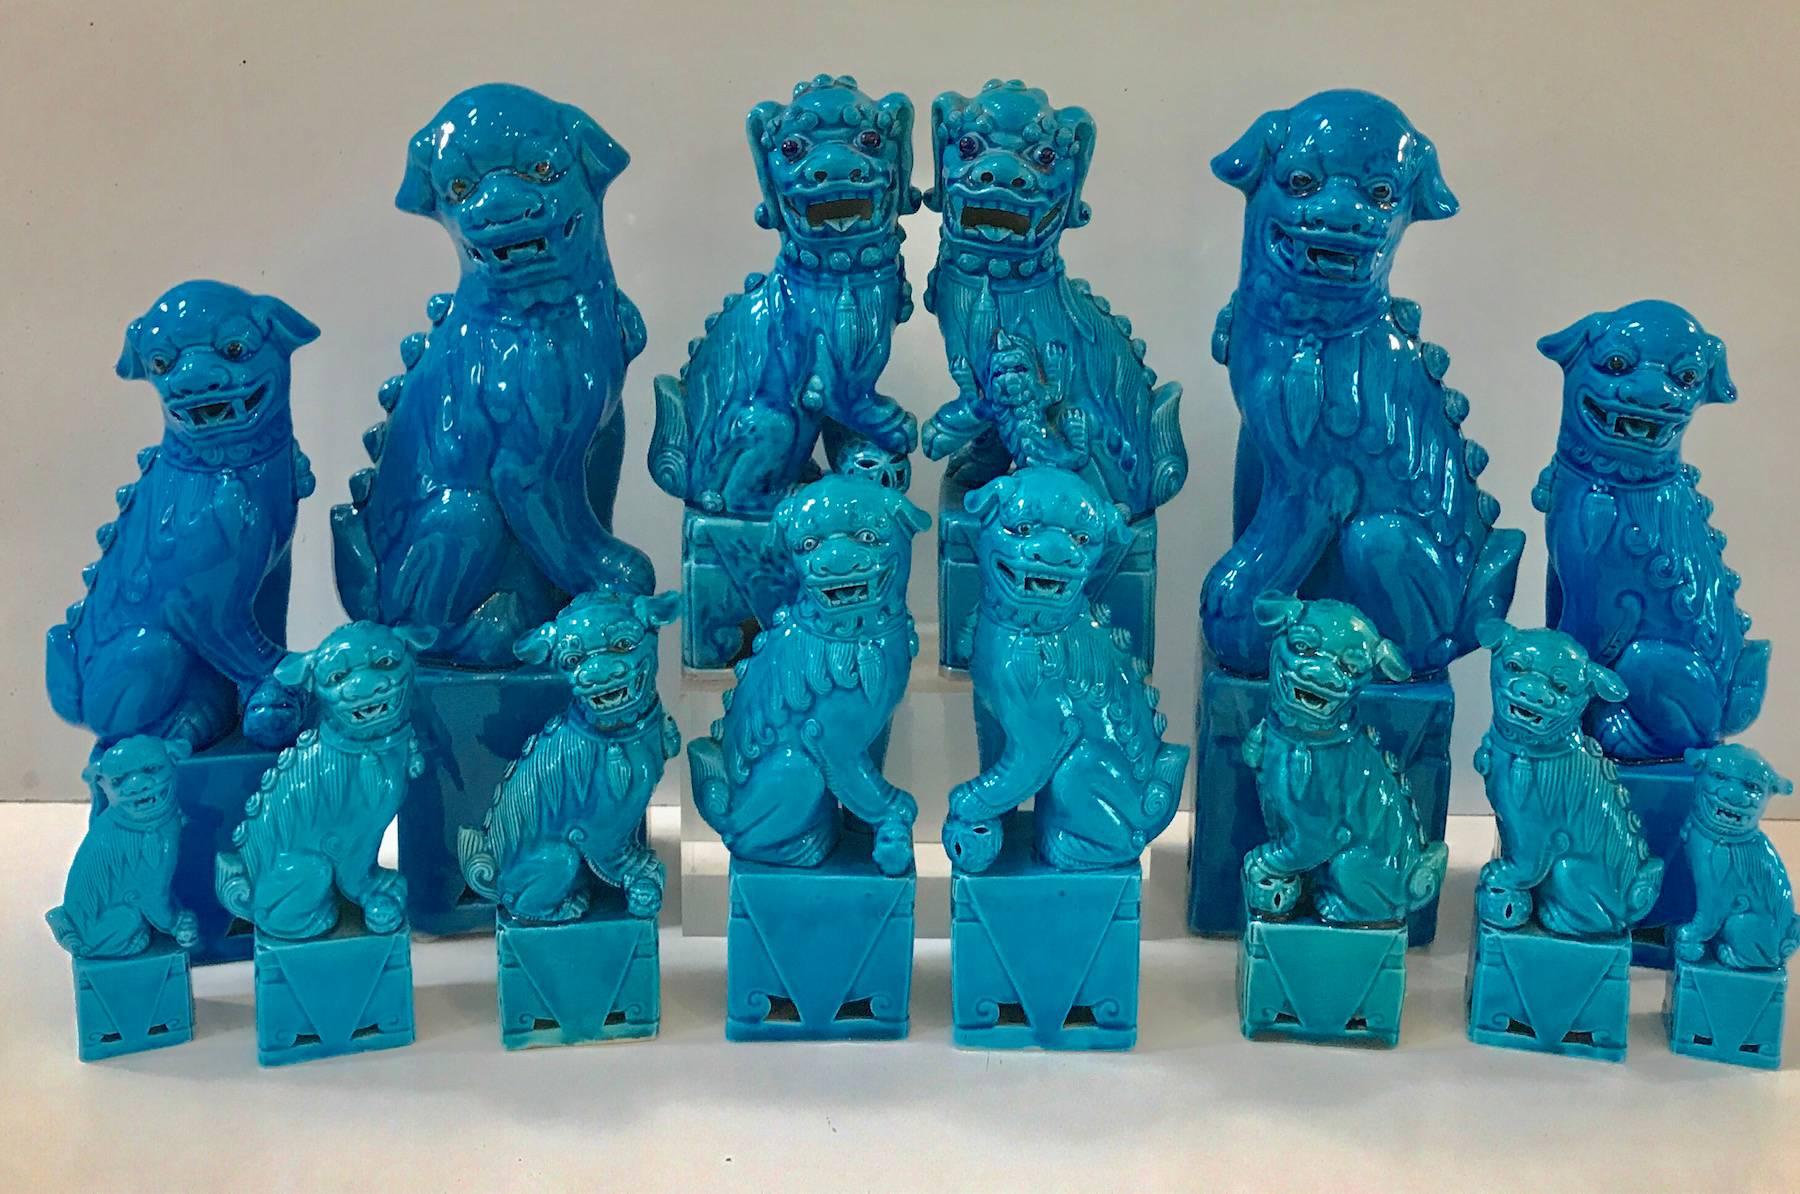 Collection of 14 (seven pairs) graduating turquoise Chinese Export foo dogs standing from 12.5 inches to 4.5 inches high.
43.5" or 3.5 feet as shown in the lead image
Pair #1- 12.5" x 3.5"  W x3" D - 5 inches wide at the widest